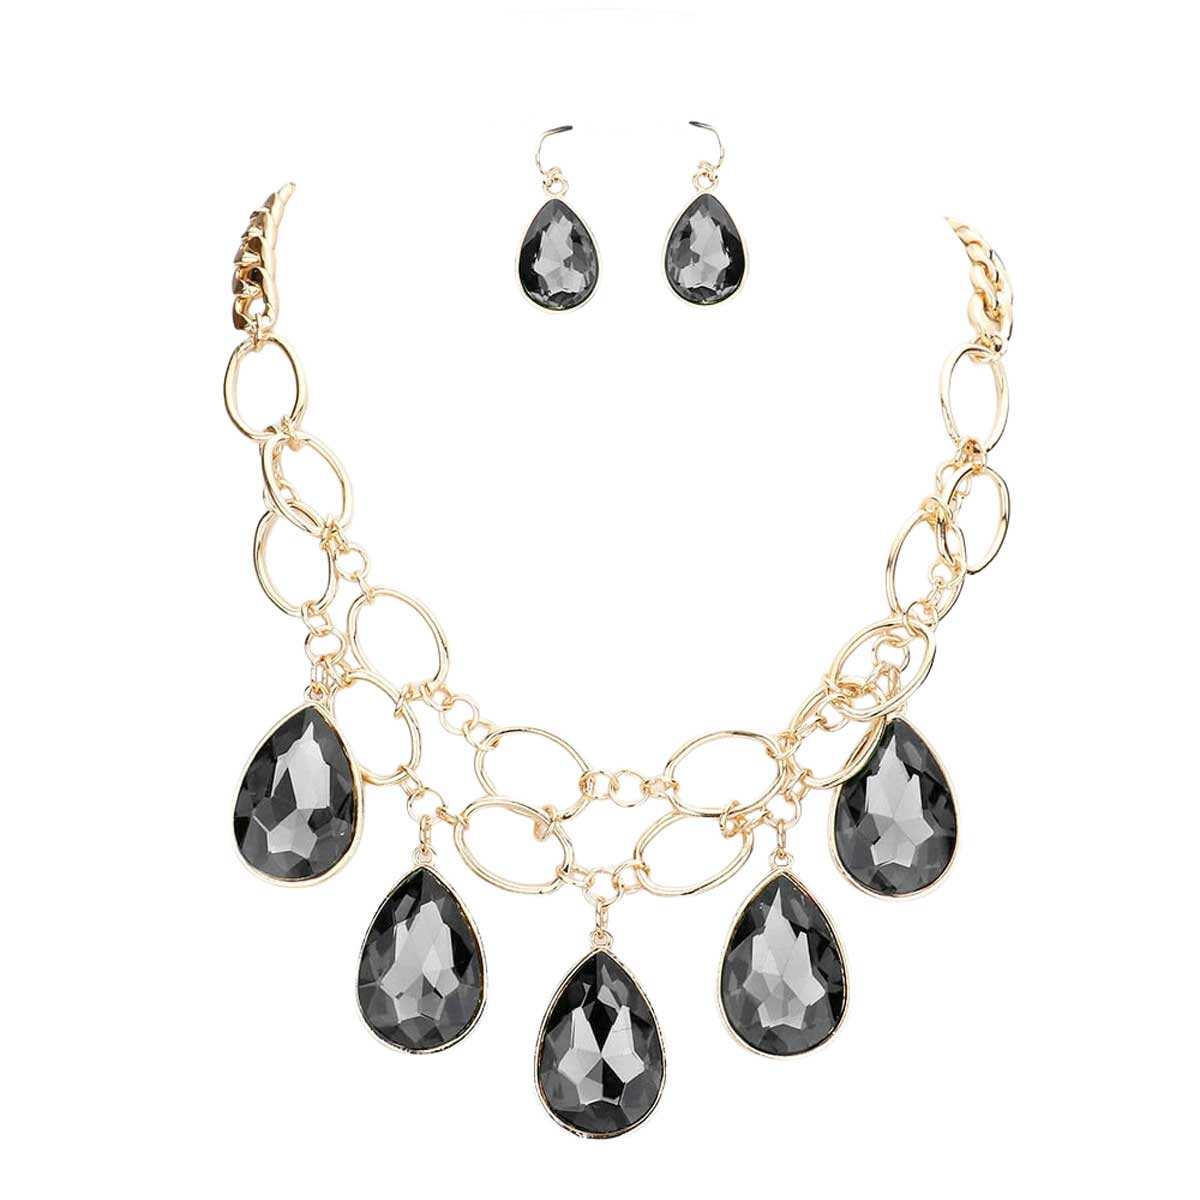 Black Teardrop Stone Accented Open Metal Oval Link Evening Necklace, this gorgeous jewelry set will show your class on any special occasion. The elegance of these stones goes unmatched, great for wearing at a party! stunning jewelry set will sparkle all night long making you shine like a diamond on special occasions. Perfect jewelry to enhance your look and for wearing at parties, weddings, date nights, or any special event.